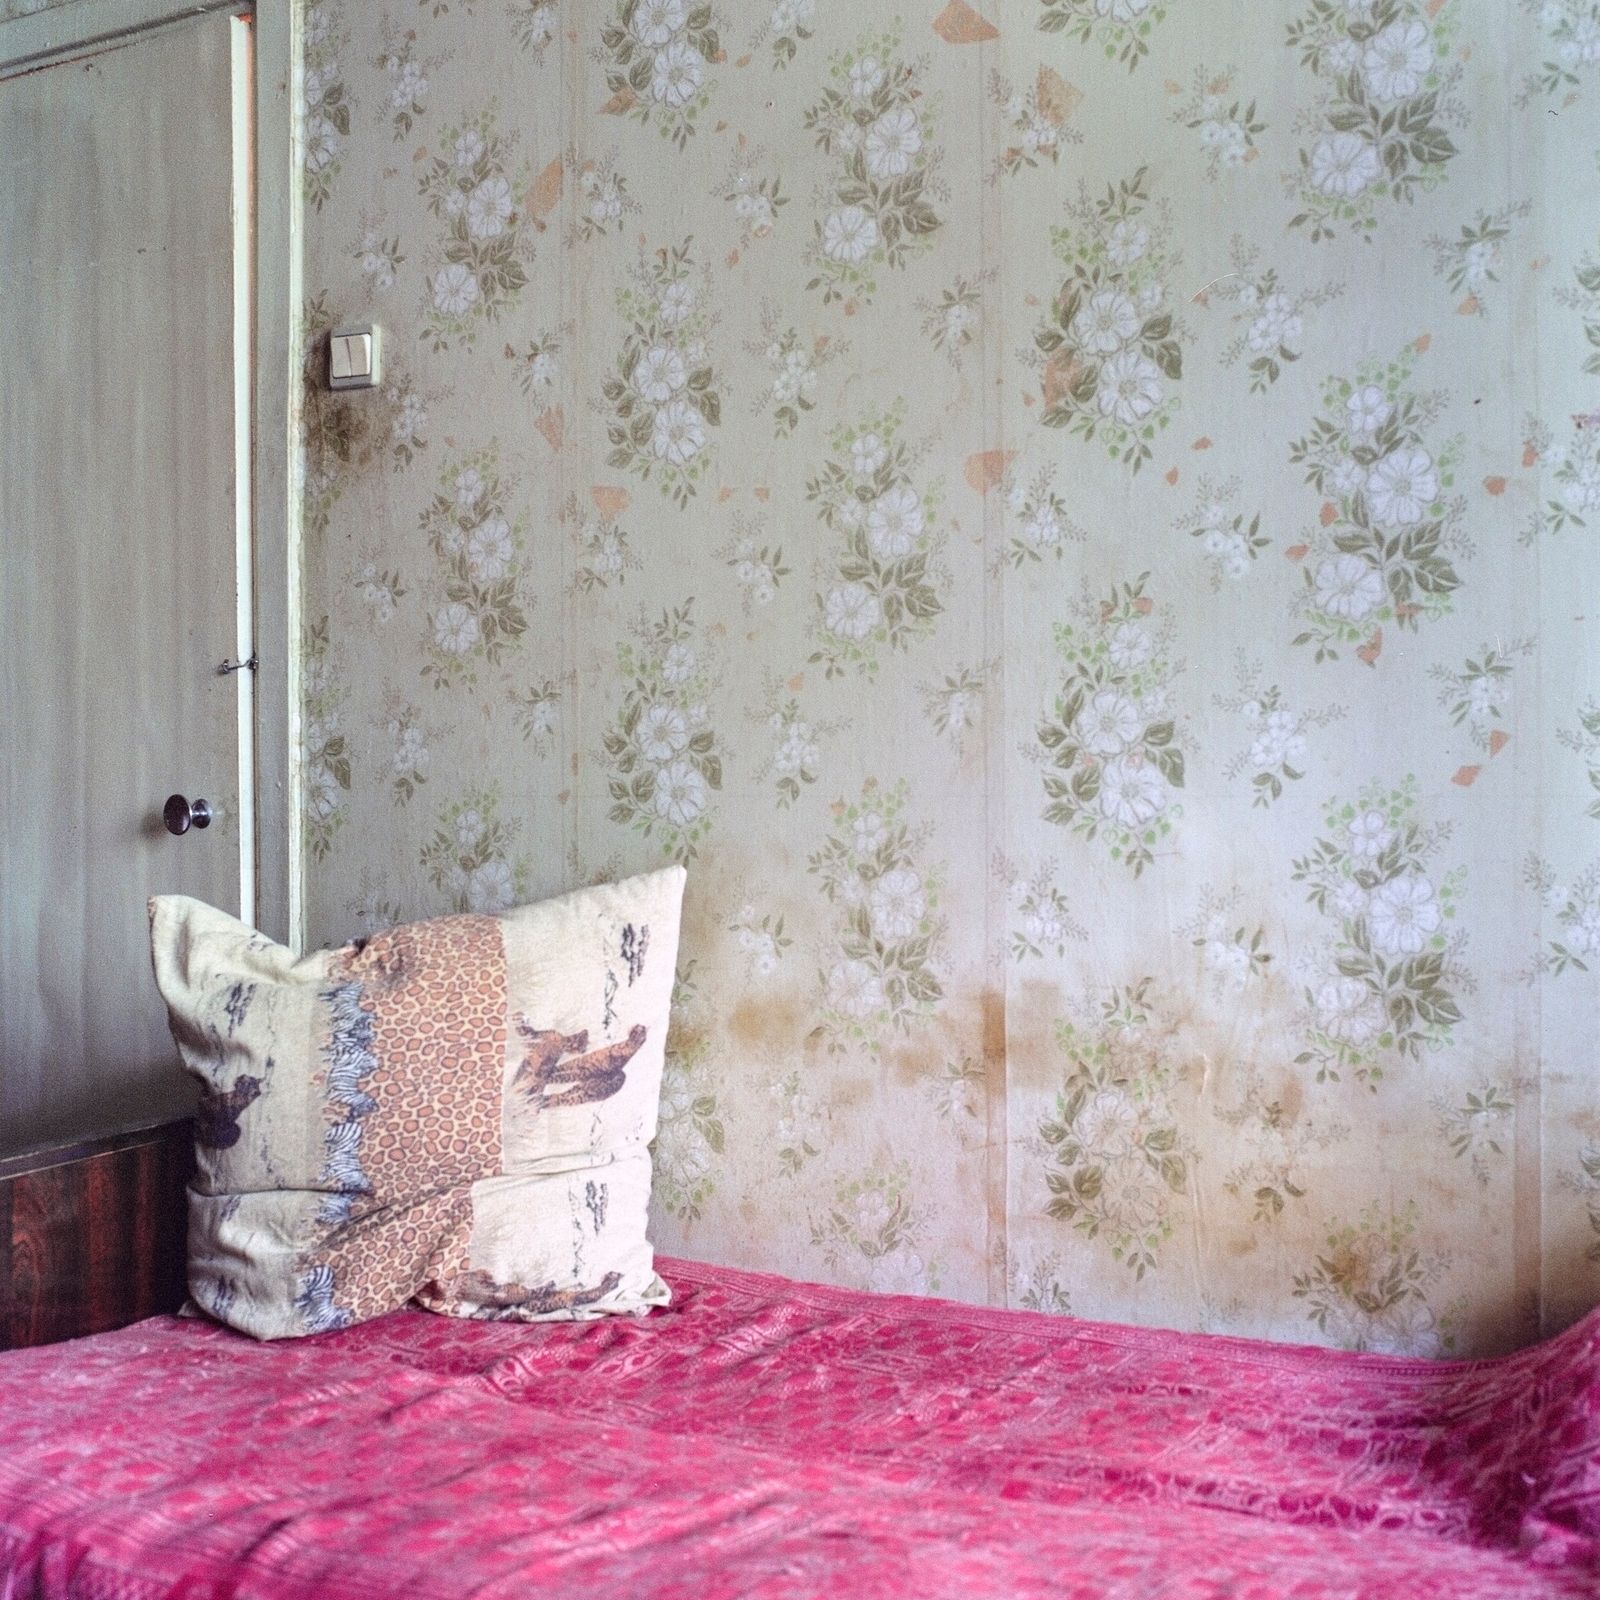 © Eugenia Maximova - Image from the Of Time and Memory photography project